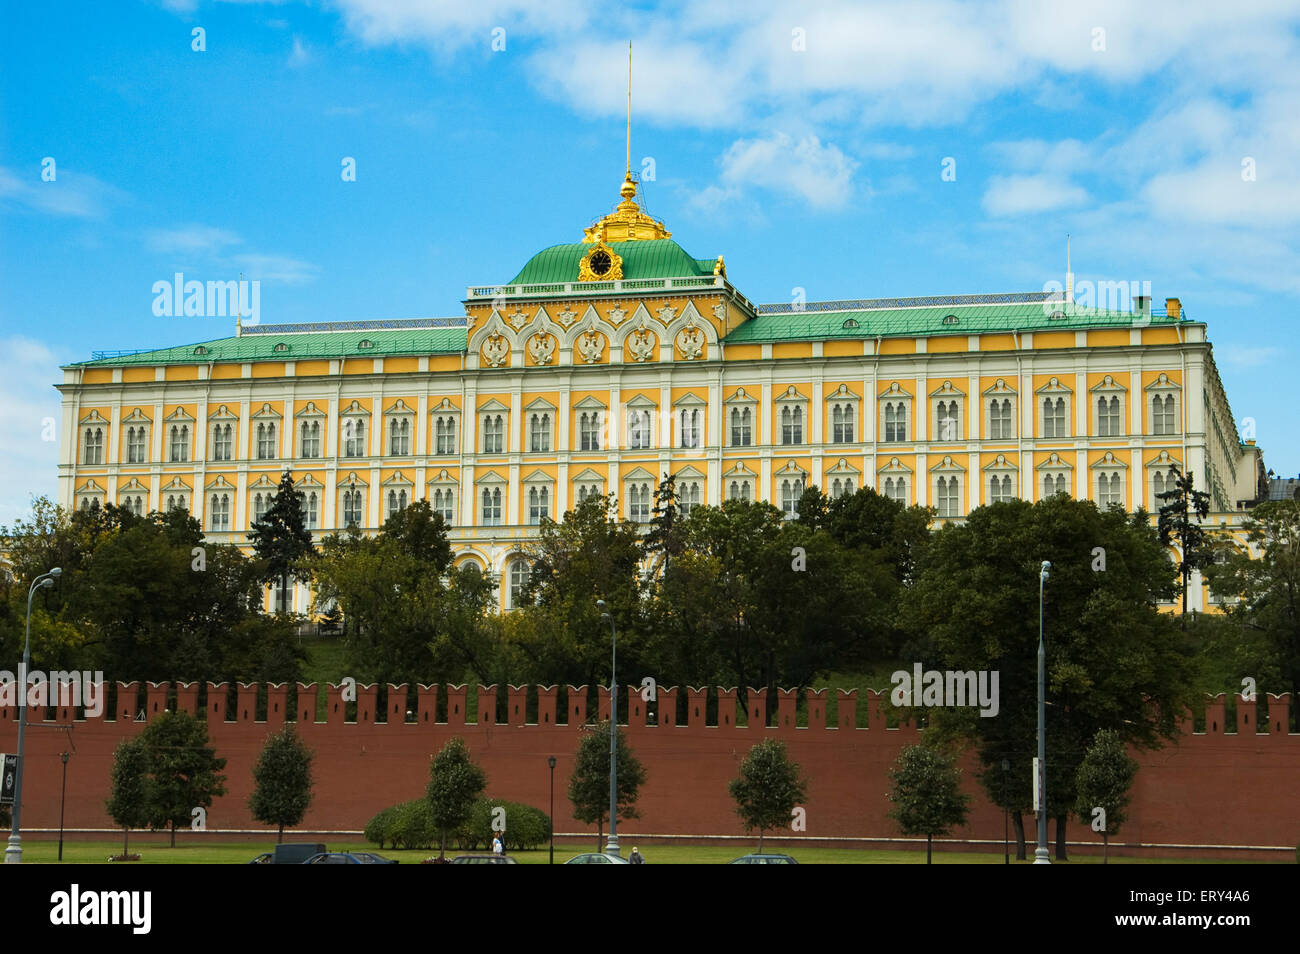 The Great Kremlin Palace overlooks the Kremlin walls and Moskva River in the Russian Capital Moscow Stock Photo